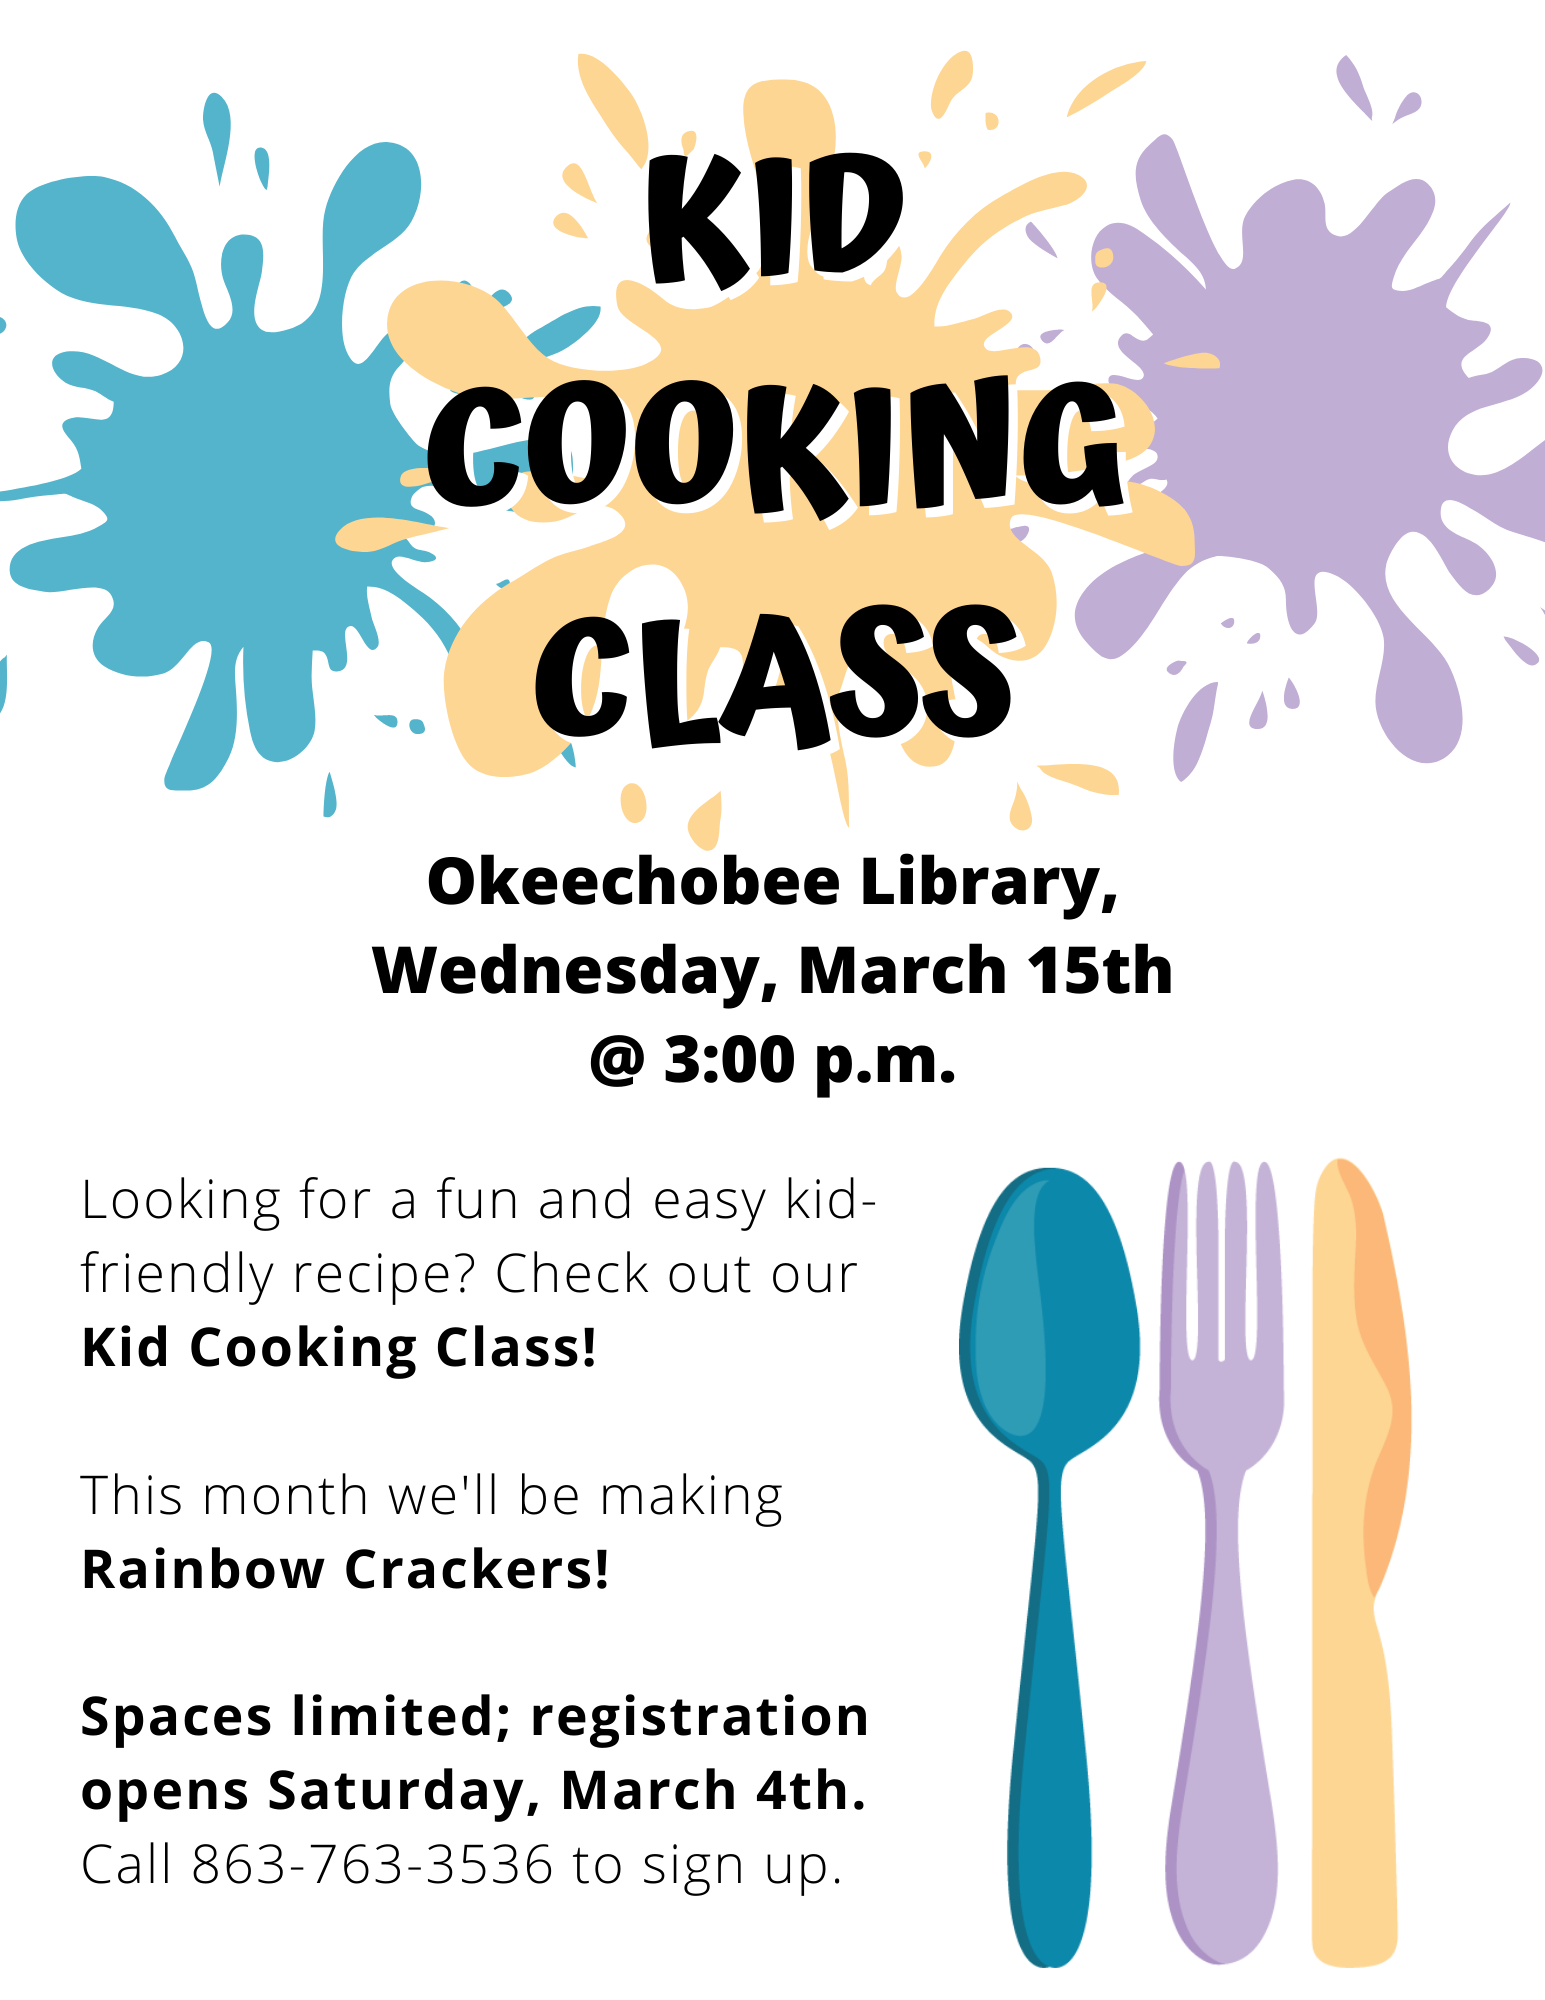 Join us at the Okeechobee Library on Wednesday, March 15th @ 3:00 p.m. for our Kid Cooking Class where we'll be making Rainbow Crackers! 